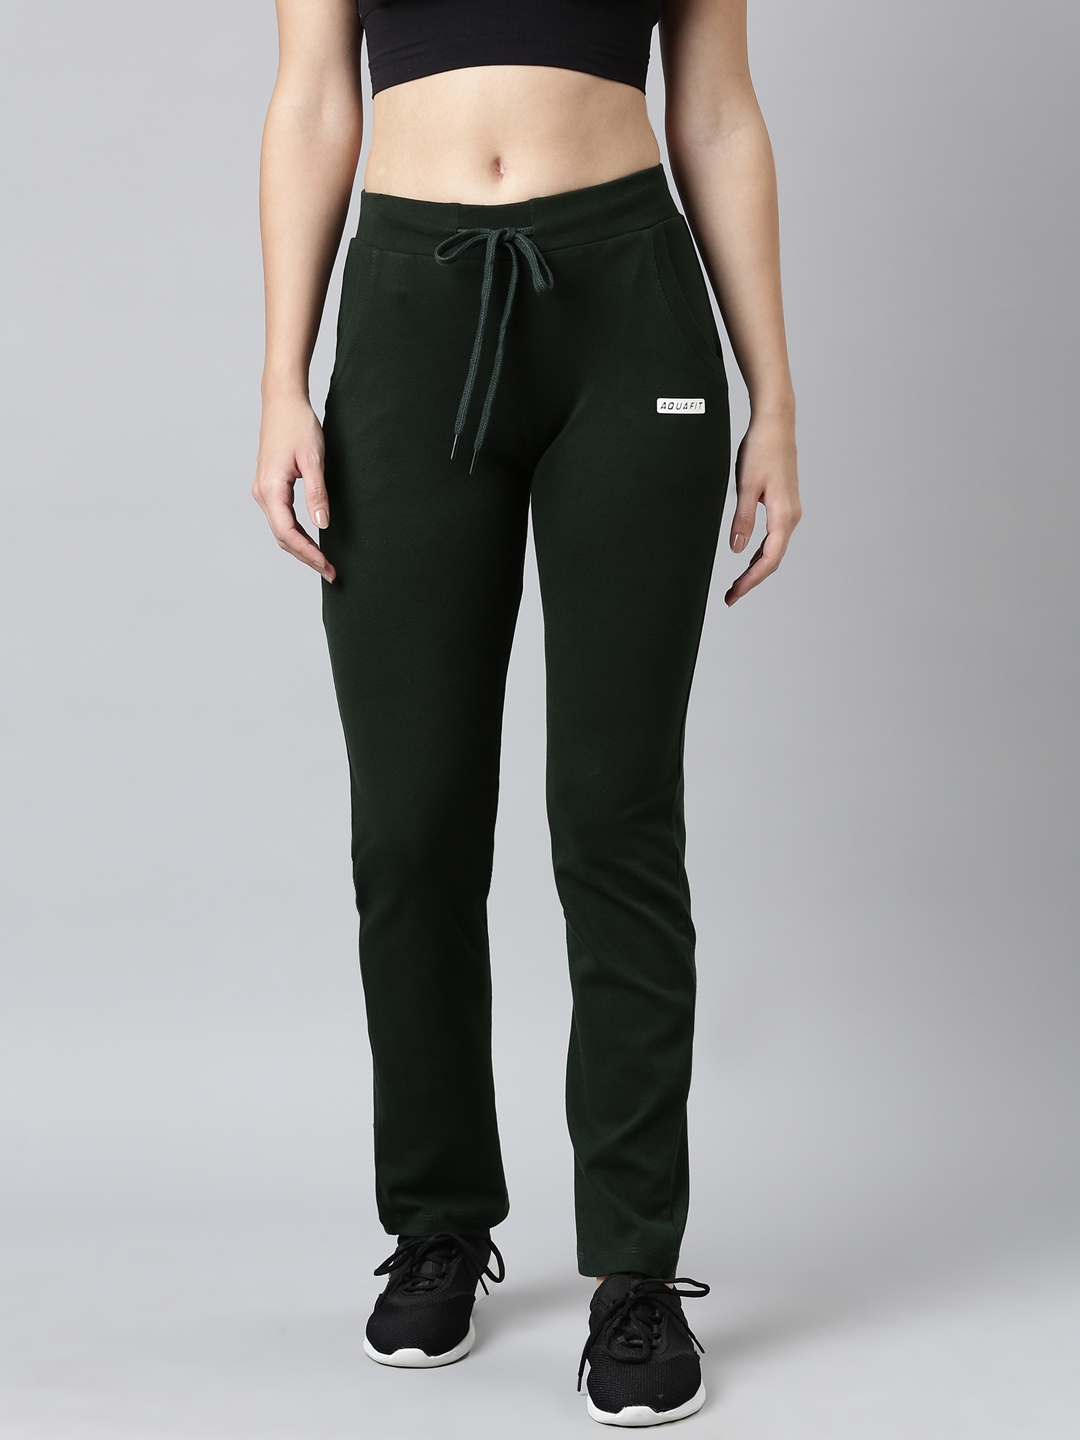 SHOWOFF Women's Solid Slim Fit Green Track Pant